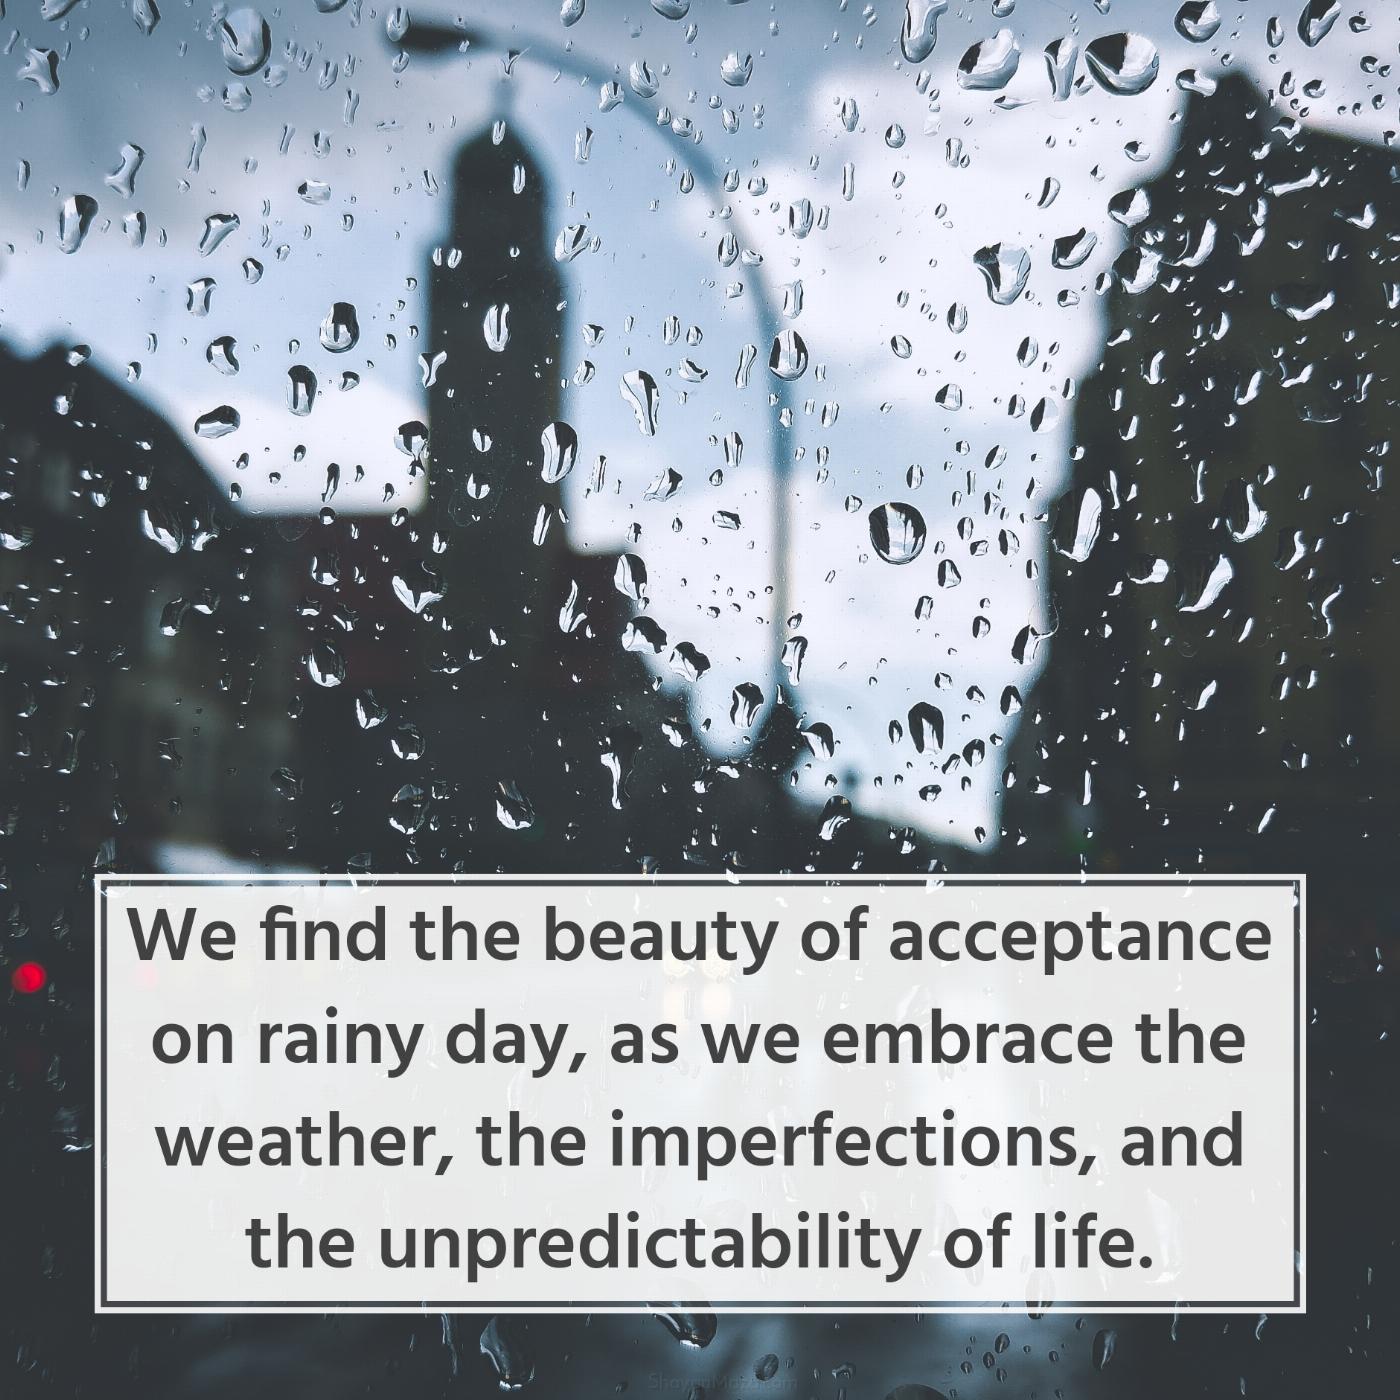 We find the beauty of acceptance on rainy day